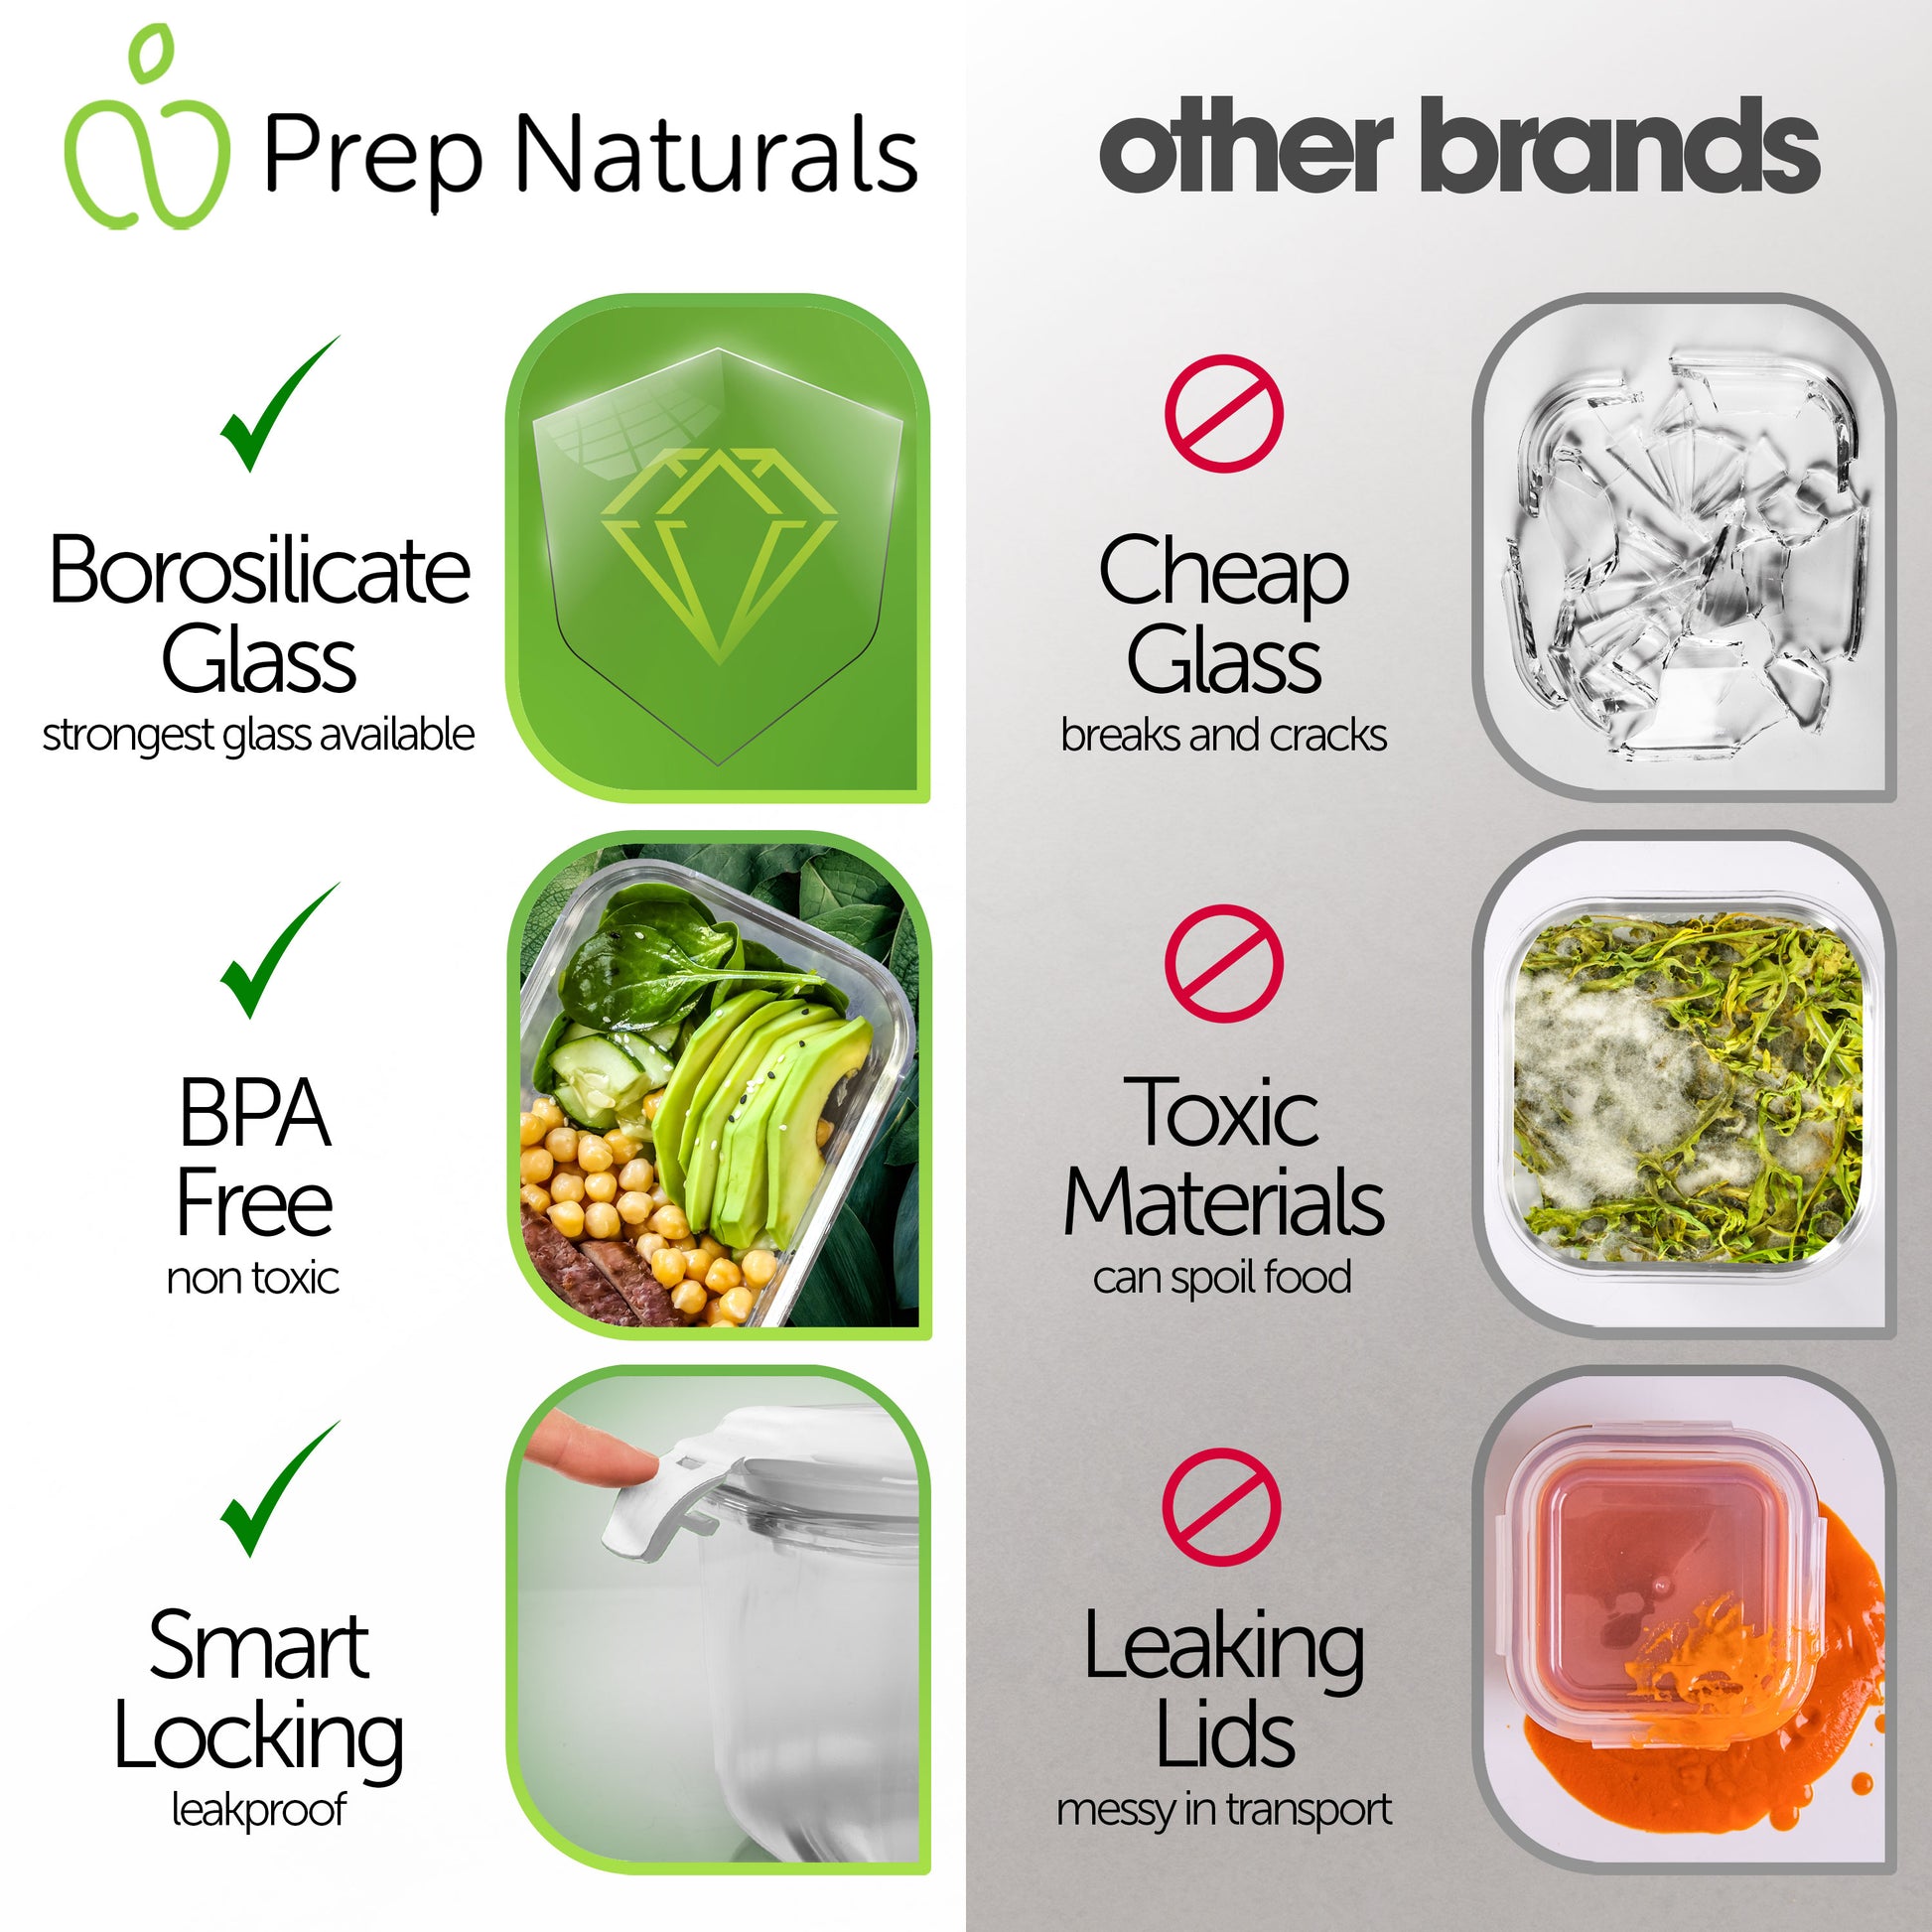 PrepNaturals Glass Storage Containers vs other brands